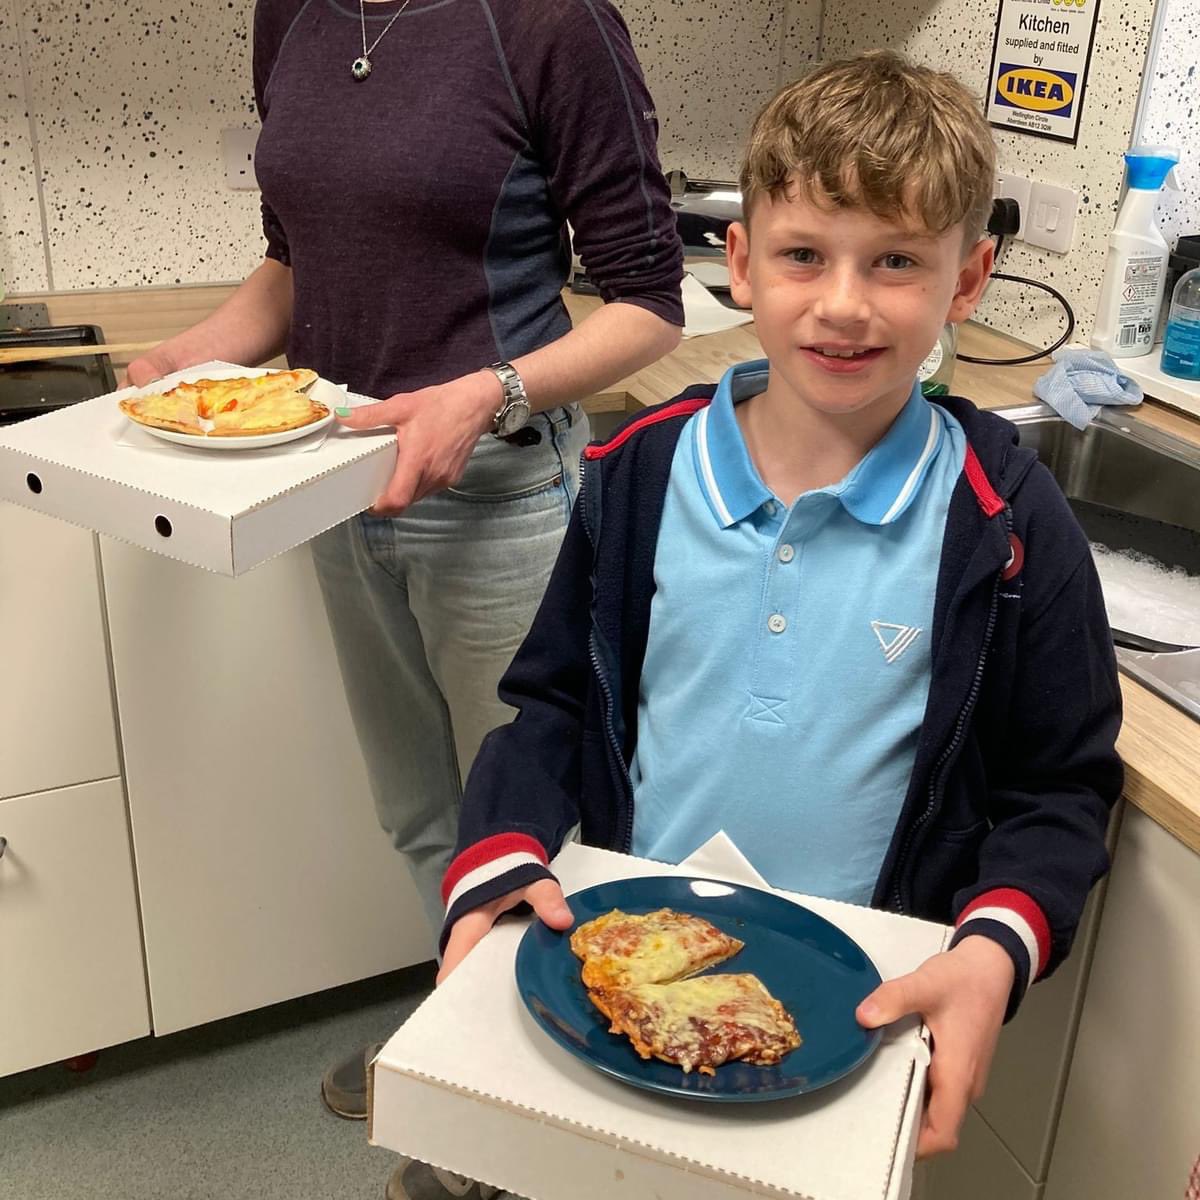 Our pizza making group activity session is always a popular one! 🍕🍕 What fun was had! 🥳 Our group activities are a great opportunity for the children we support to meet other children going through similar situations and help to boost confidence! 💛